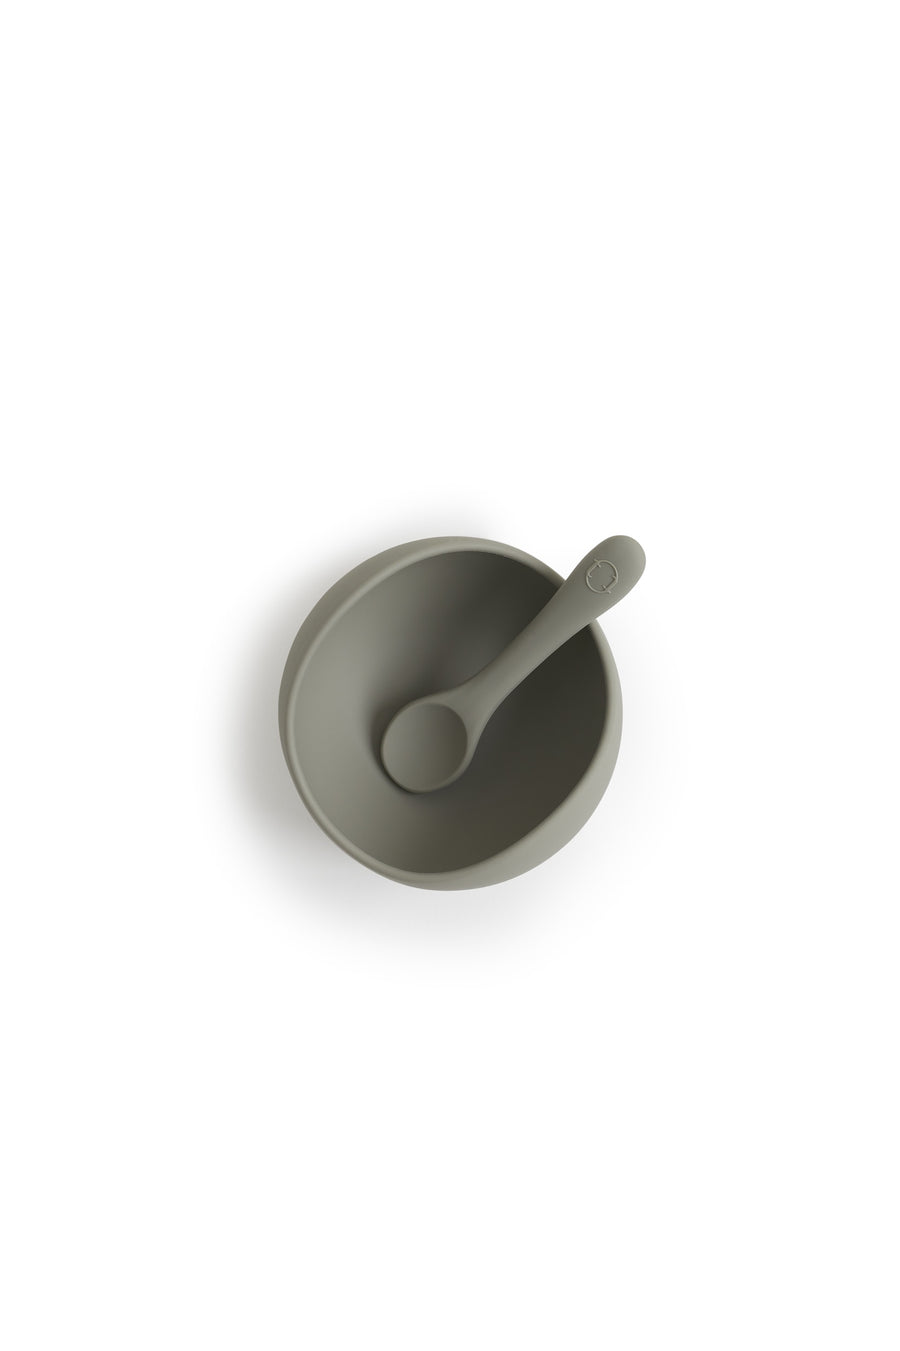 Suction Bowl & Spoon Set - Olive